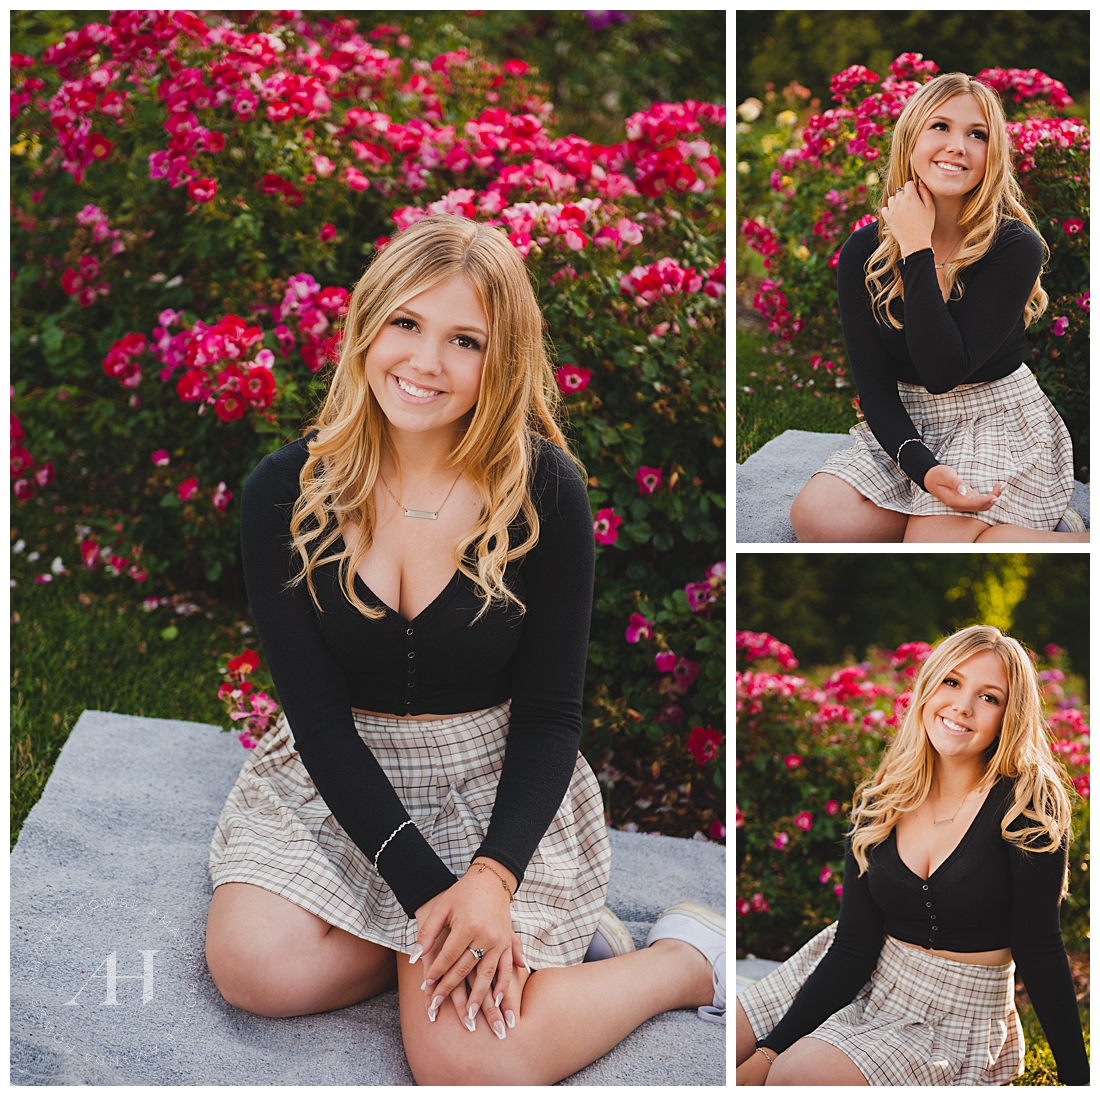 How to Use a Picnic Blanket for Senior Portraits | Senior Photo in Point Defiance Rose Garden | Photographed by the Best Tacoma Senior Portrait Photographer Amanda Howse Photography